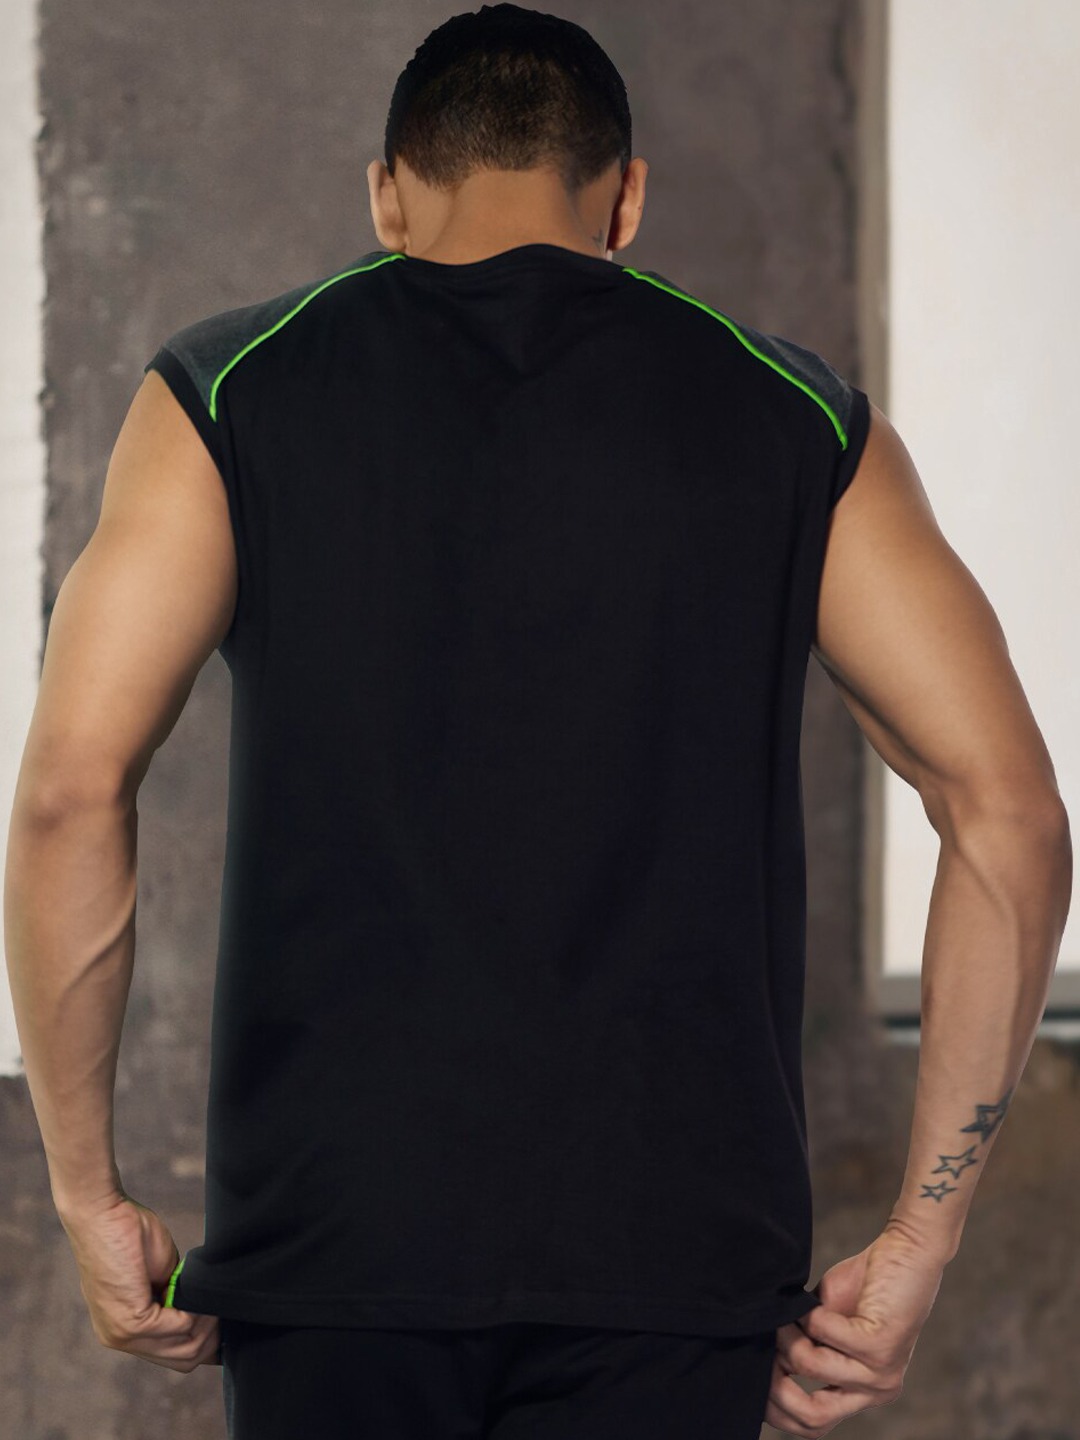 Clothing Innerwear Vests | The Souled Store Men Black Printed Gym Vest - DI23100